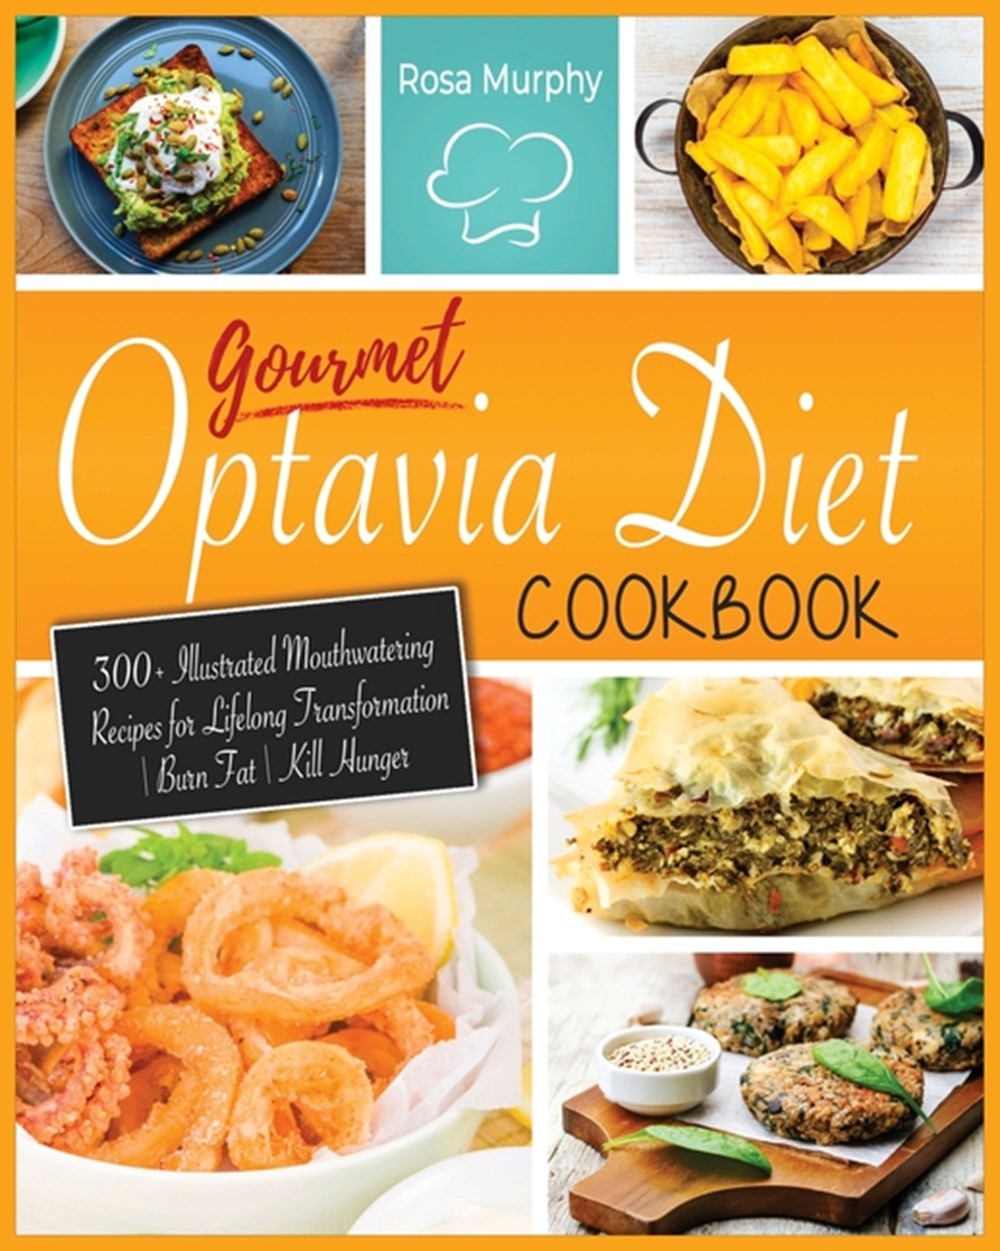 Gourmet Optavia Diet Cookbook 300+ Illustrated Mouthwatering Recipes for Lifelong Transformation - B